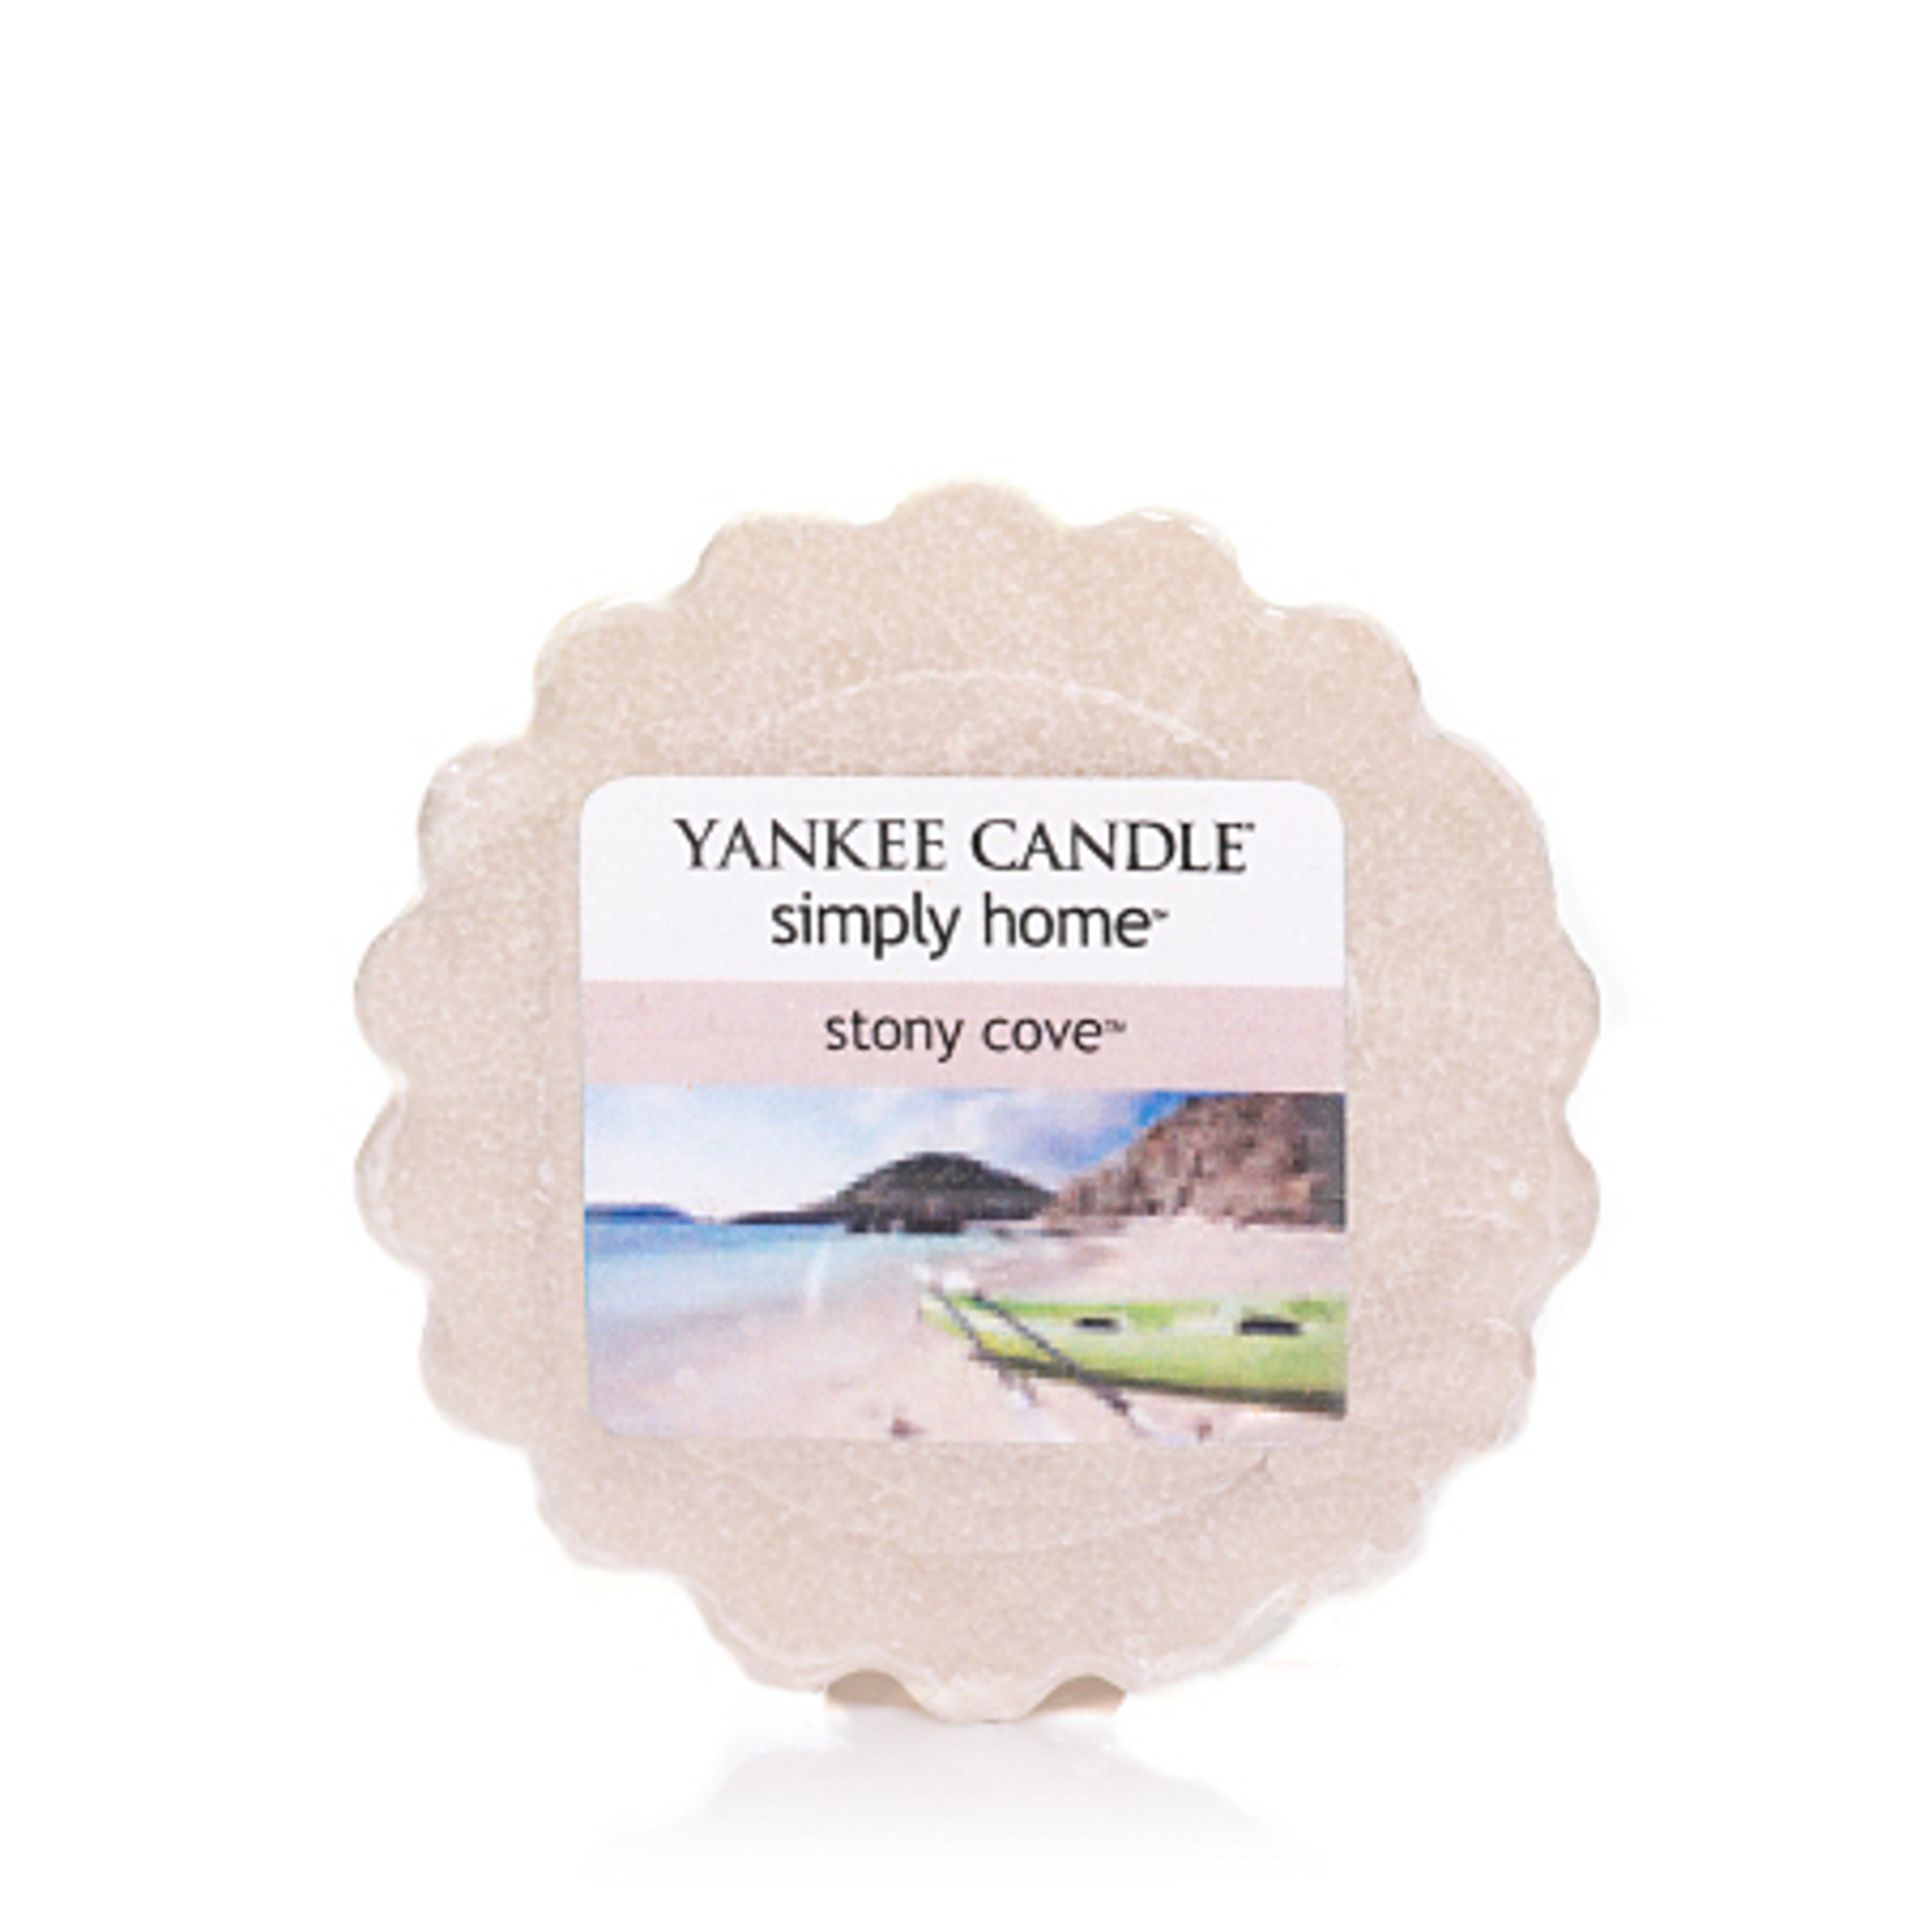 V *TRADE QTY* Brand New 24 x Yankee Candle Tarts Stony Cove RRP: £35.76 (Yankee Candles) X 8 YOUR - Image 2 of 2